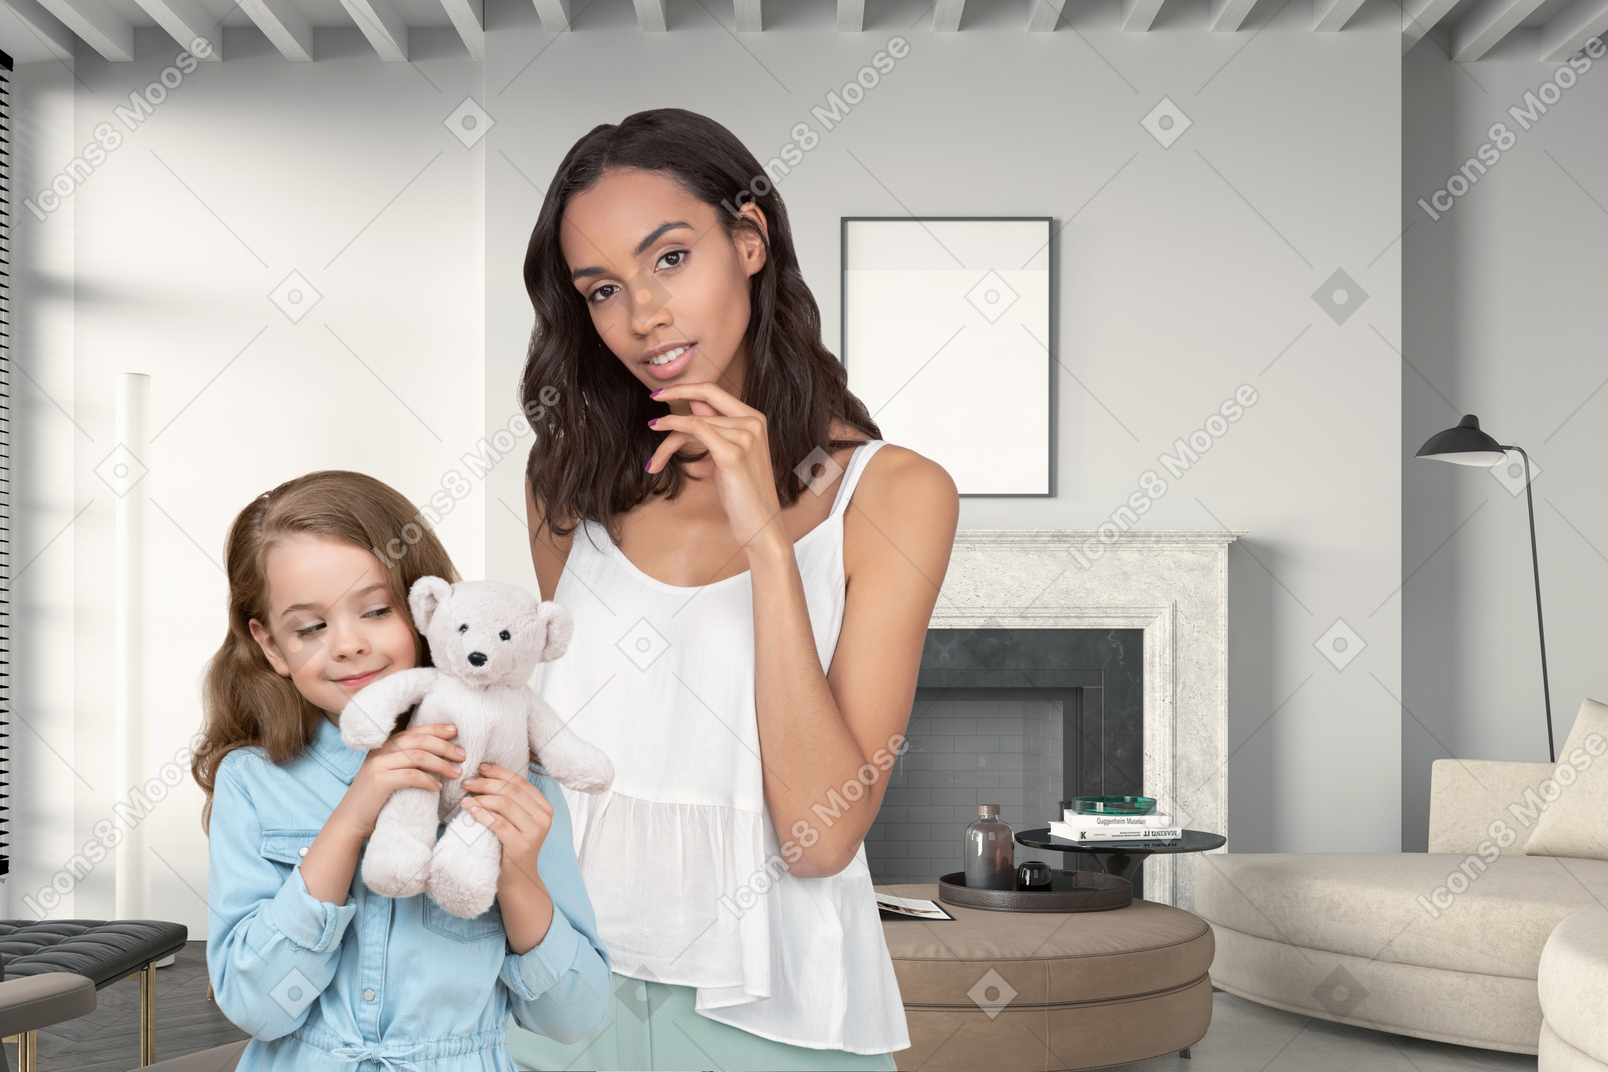 A mother and daughter holding a teddy bear in a living room